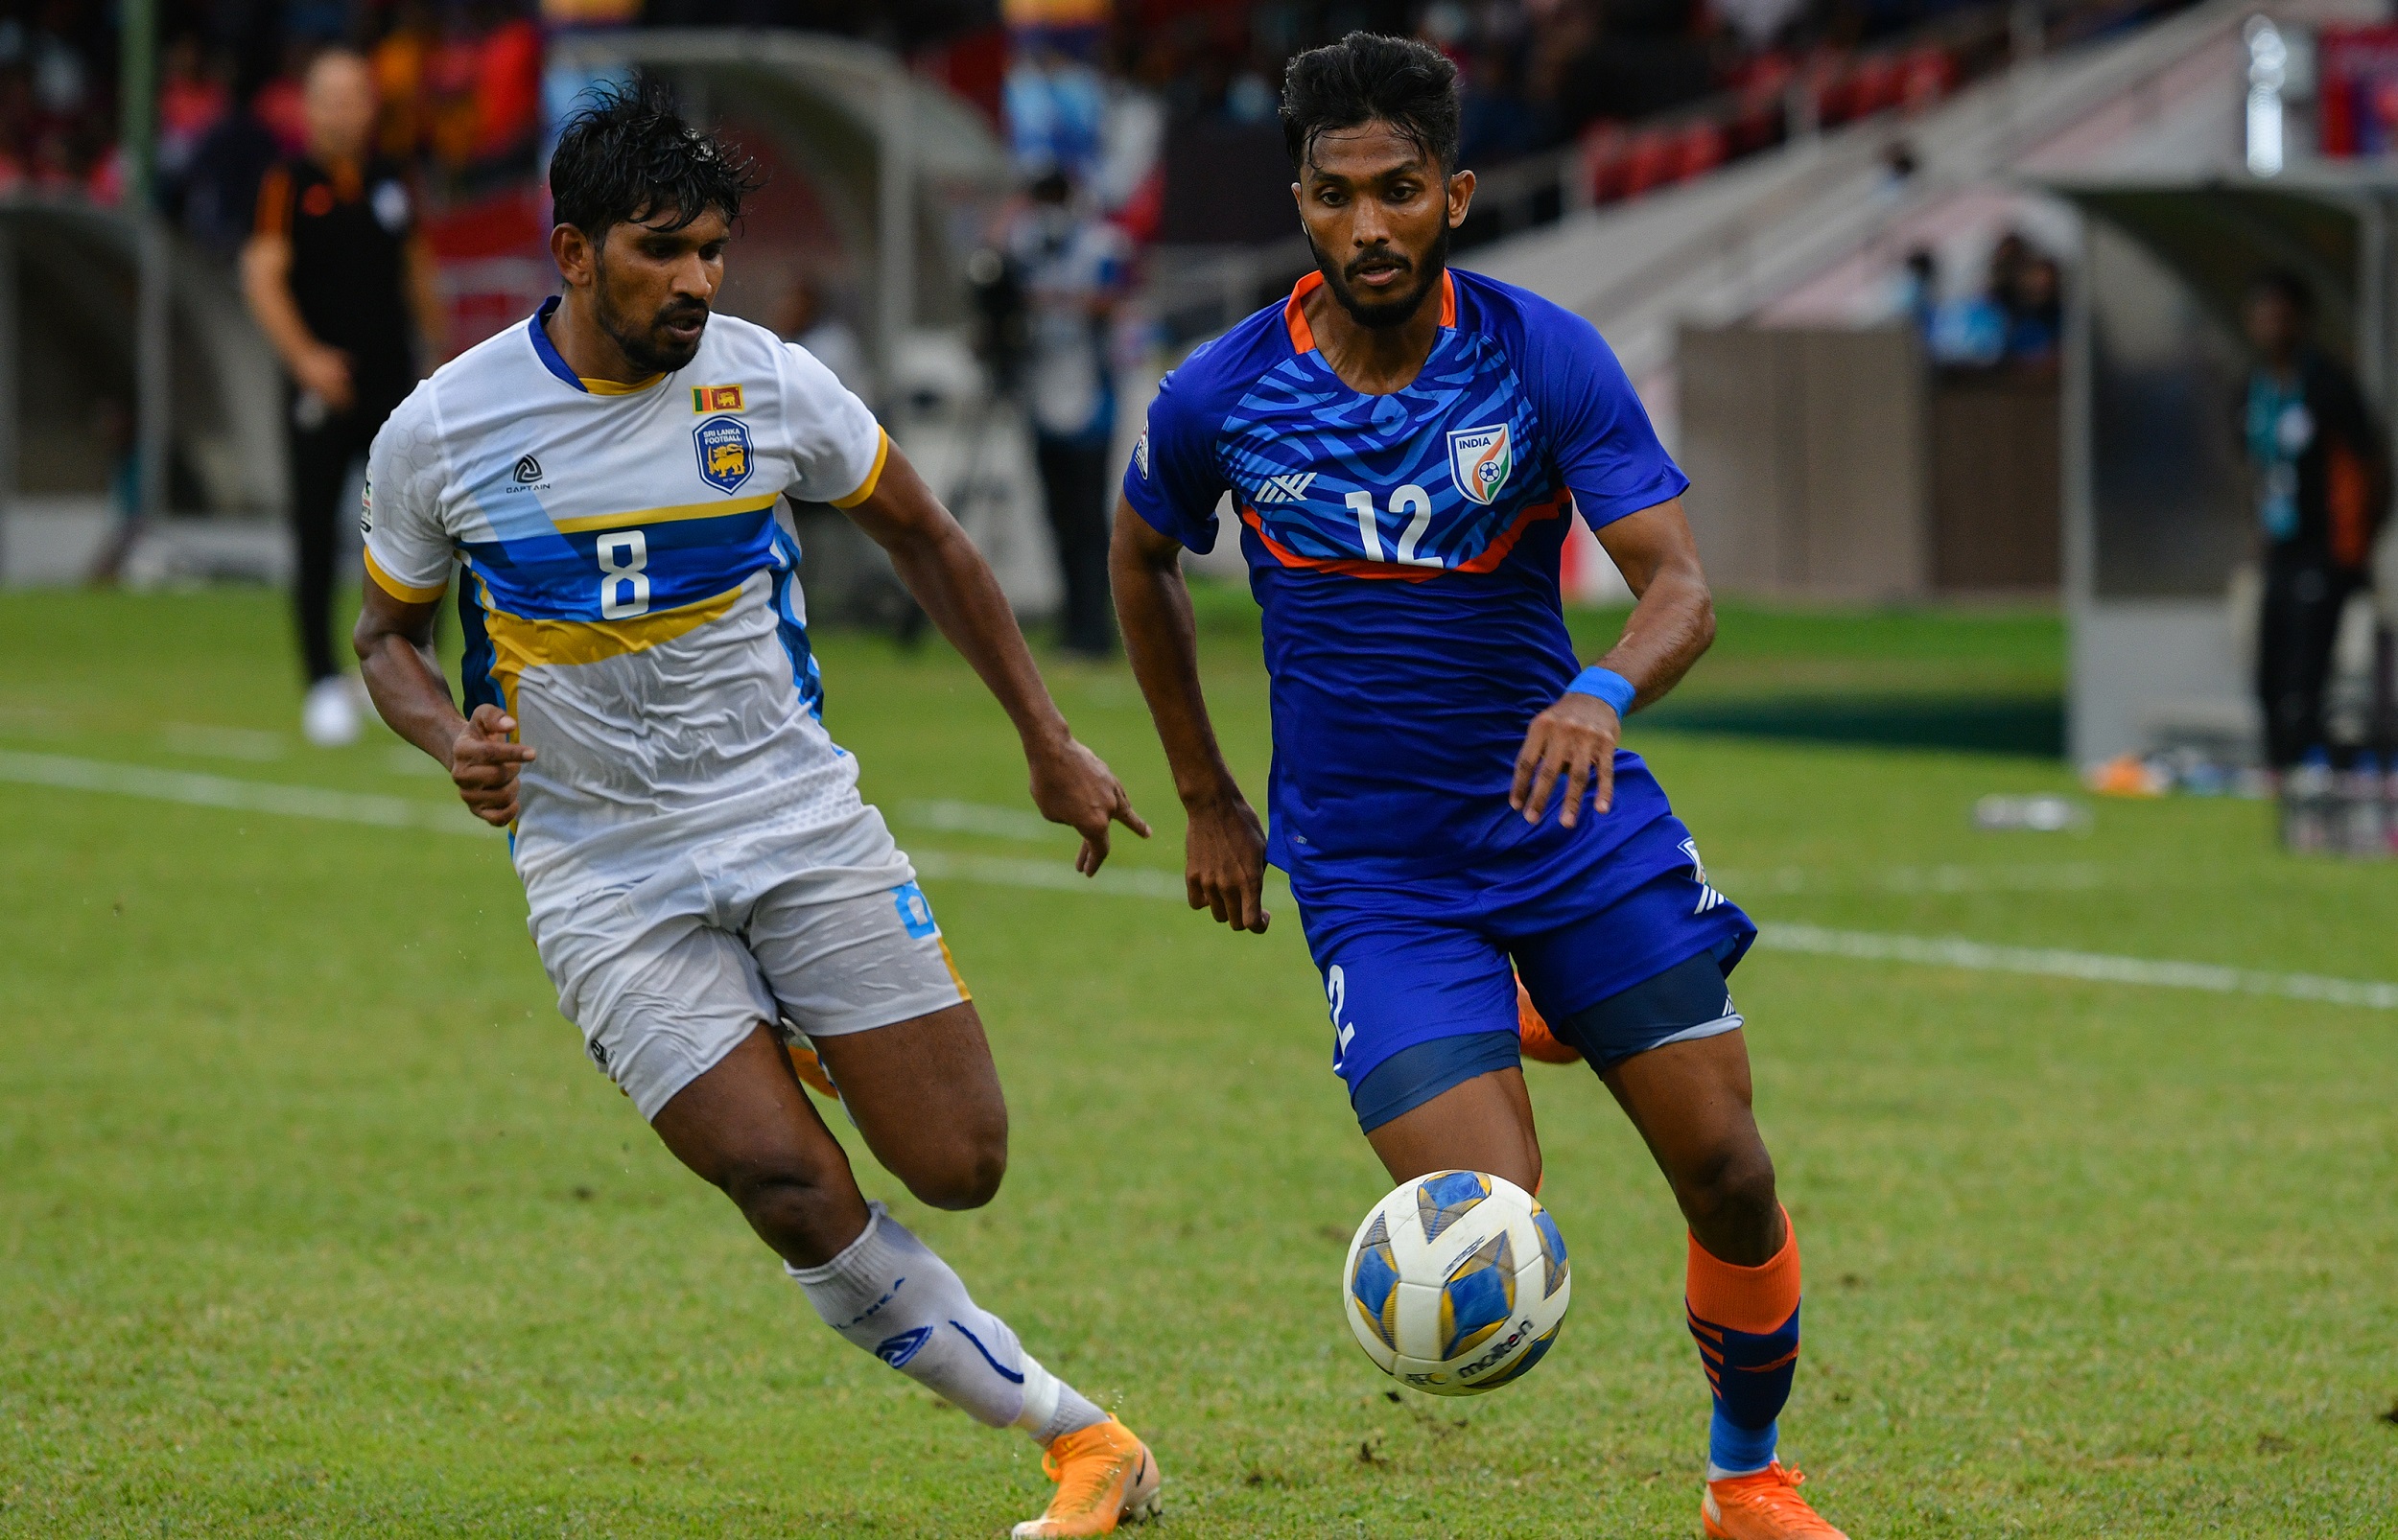 SAFF Championships 2021 | Sri Lanka keep India at bay, match ends in 0-0 draw